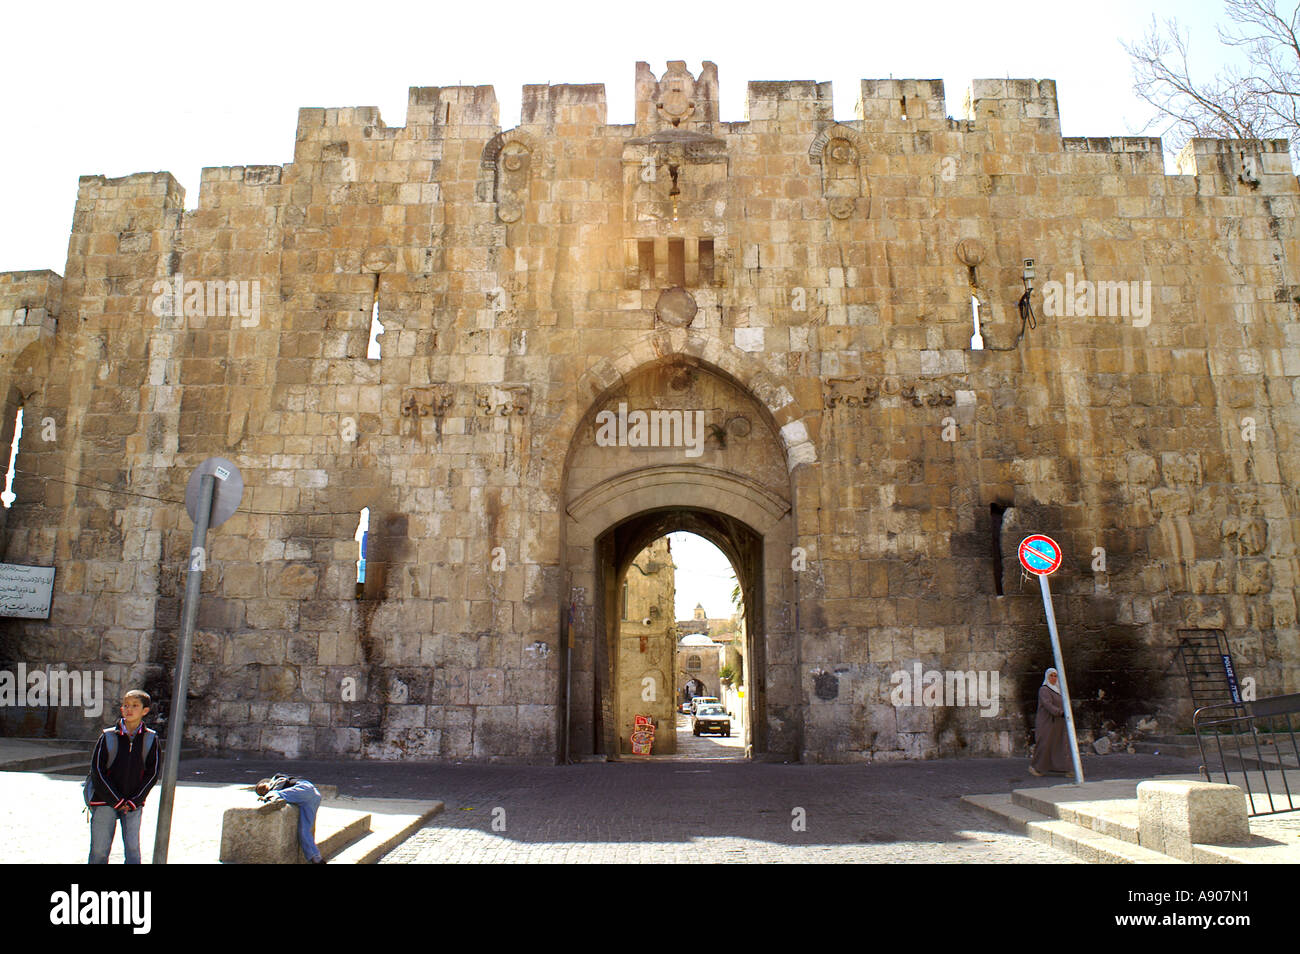 Lions gate AKA St Stephen s Gate and Bab El Isbat and Bab Sitna Mariam Jerusalem old city walls Stock Photo